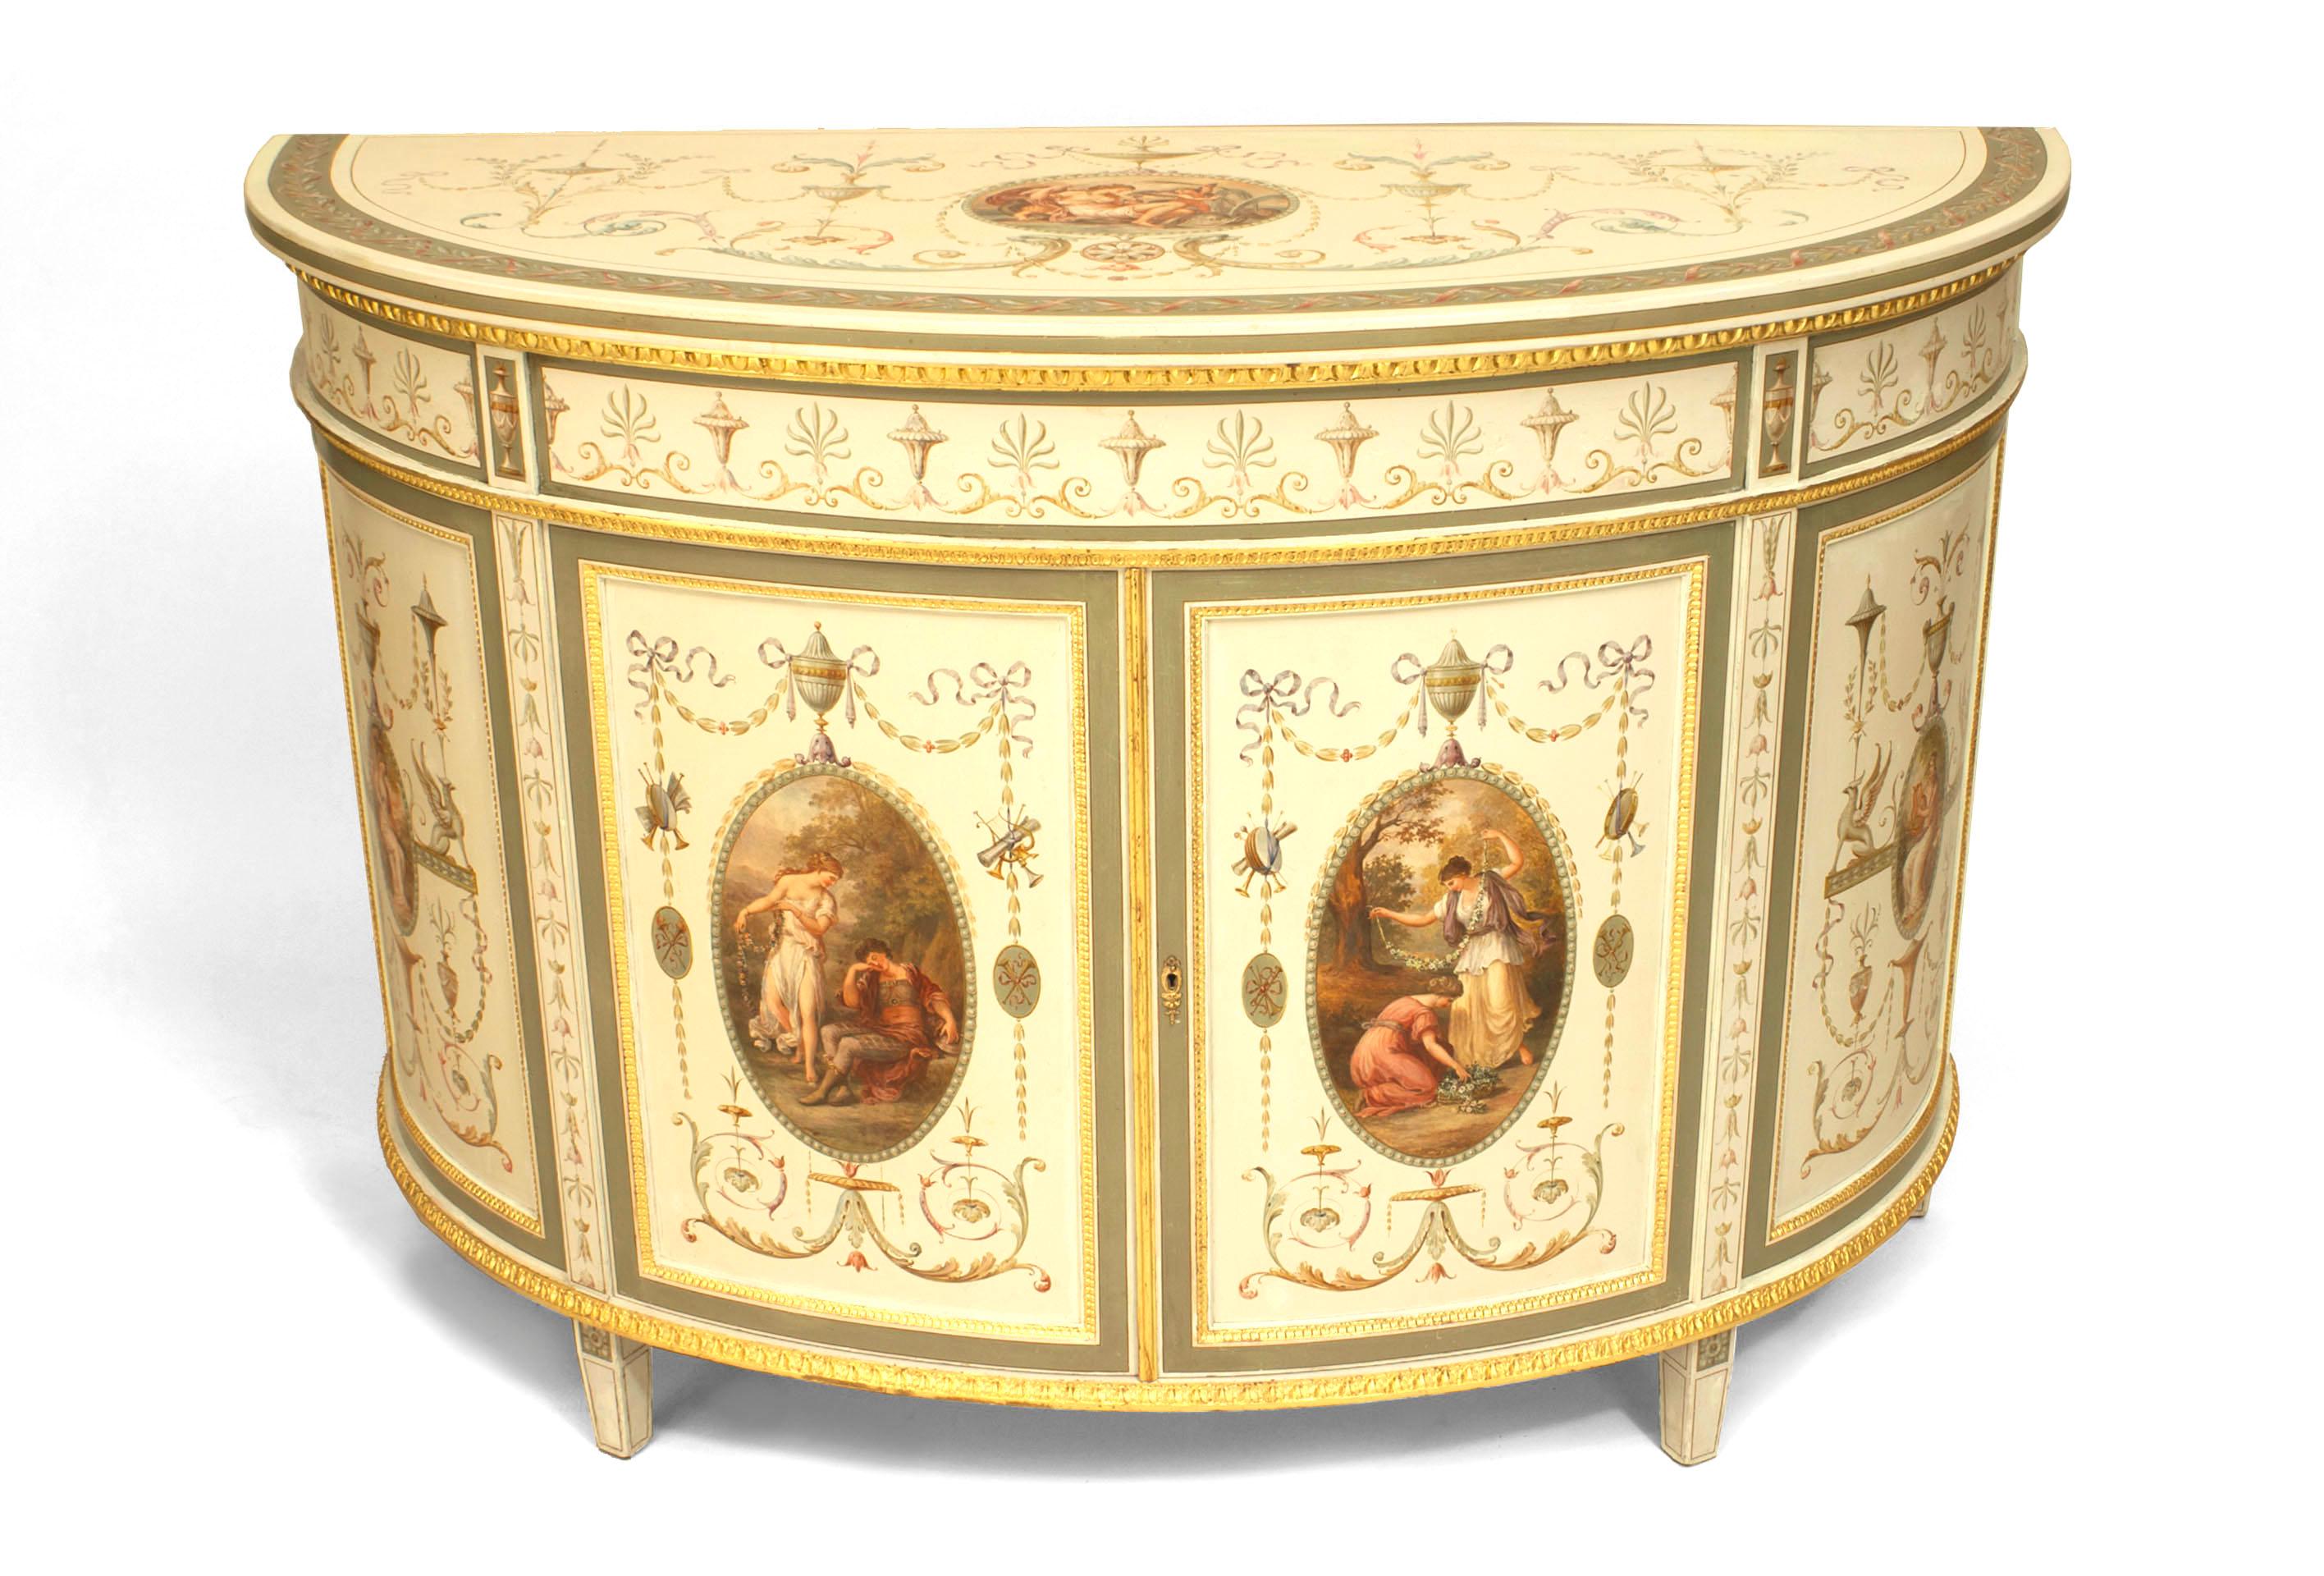 English Adam style (circa 1880) 2 door cream painted demilune shaped 2 door cabinet adorned with classical figures and motifs. (In the style of of ANGELICA KAUFFMAN).
